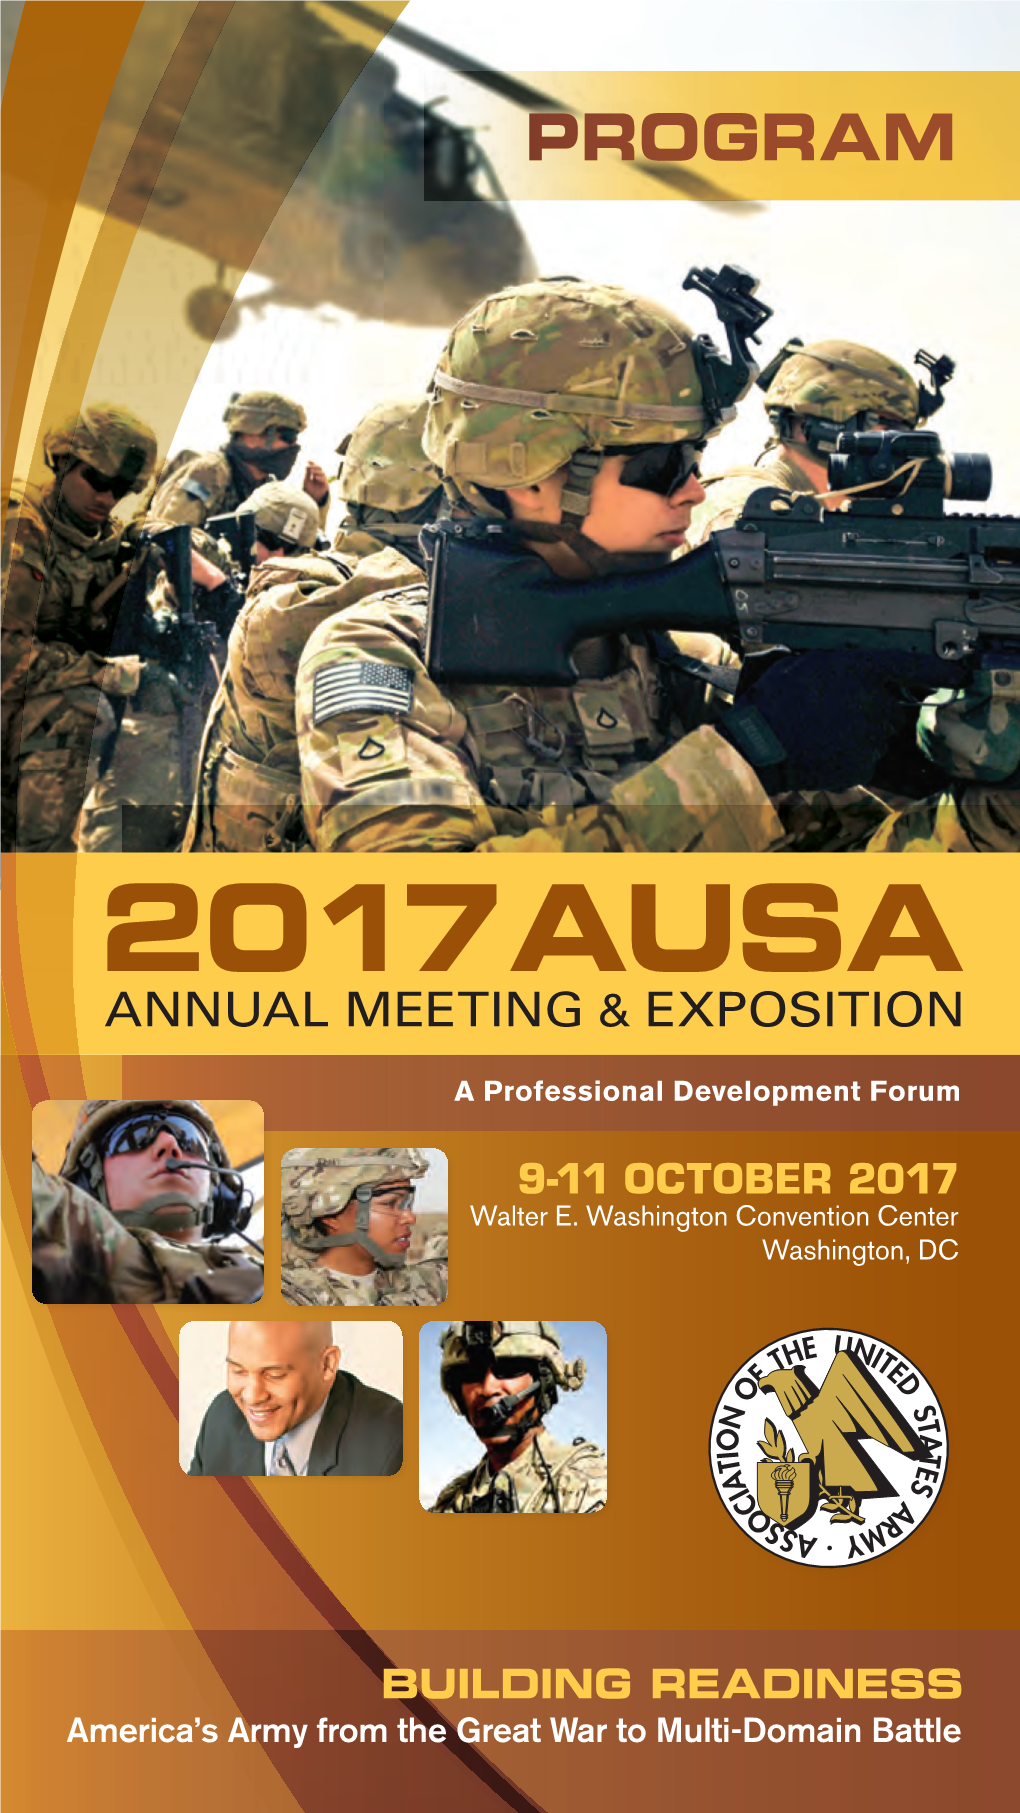 2017 Ausa Annual Meeting & Exposition